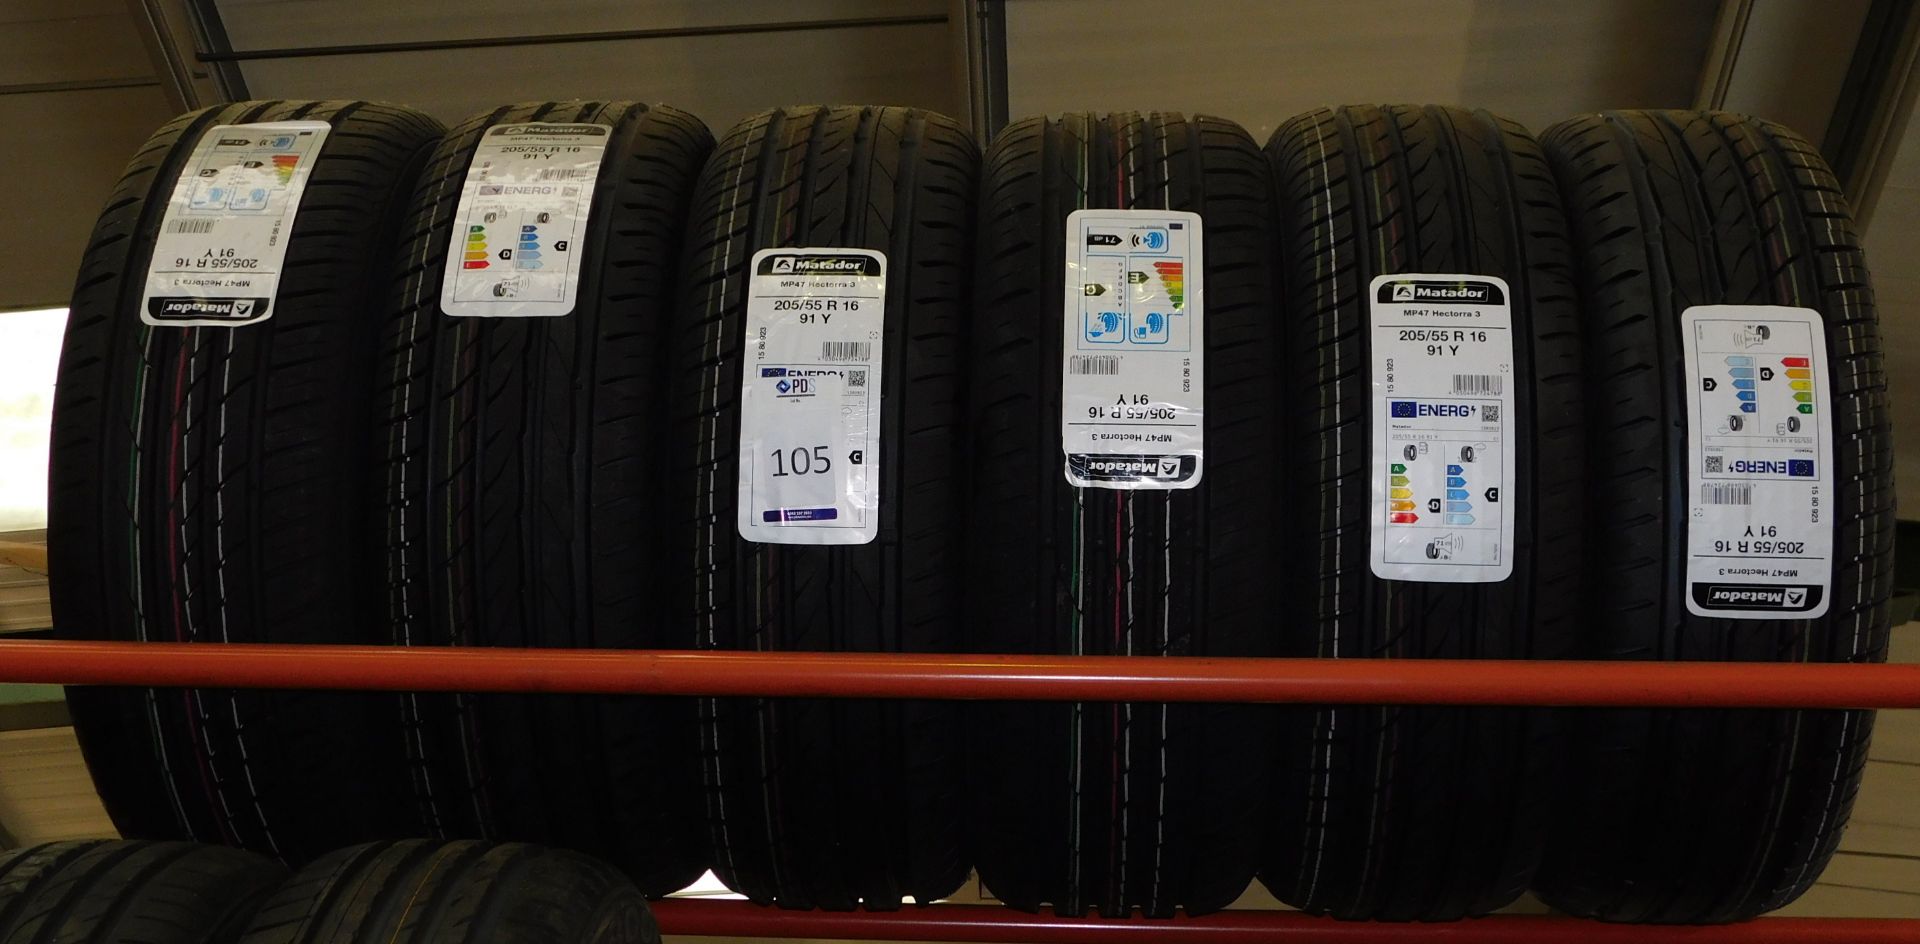 6 tyres, size 205/55 16 (Matador) (Location Northampton. Please Refer to General Notes)